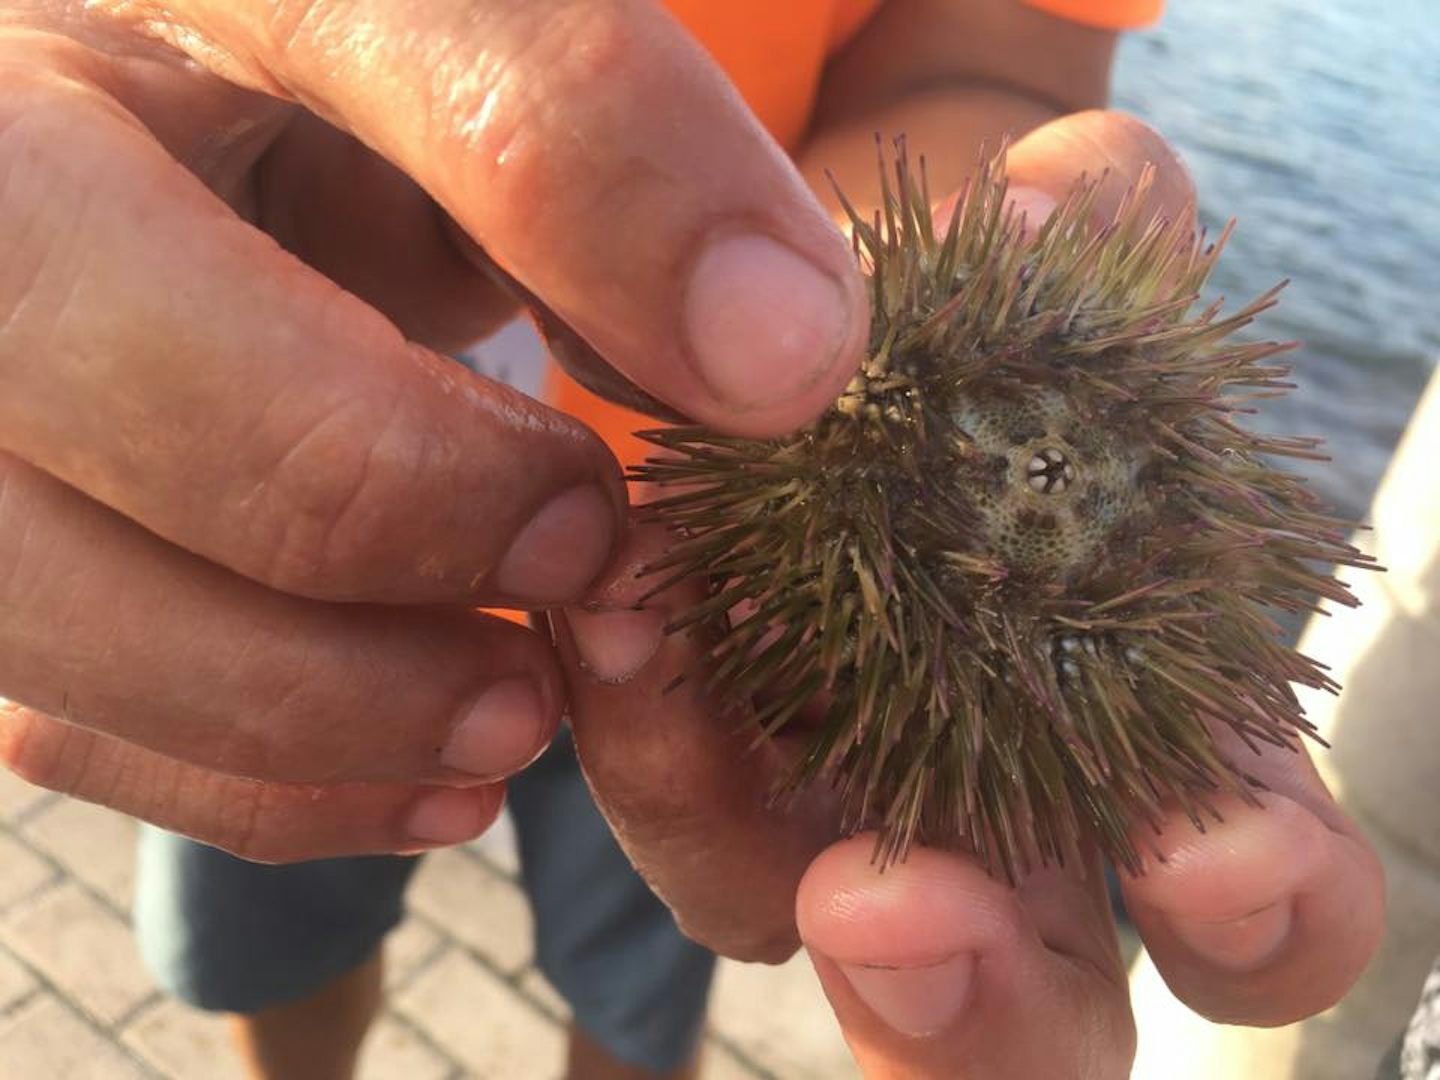 Tony reached into the water and grabbed a sea urchin for us to hold/look at